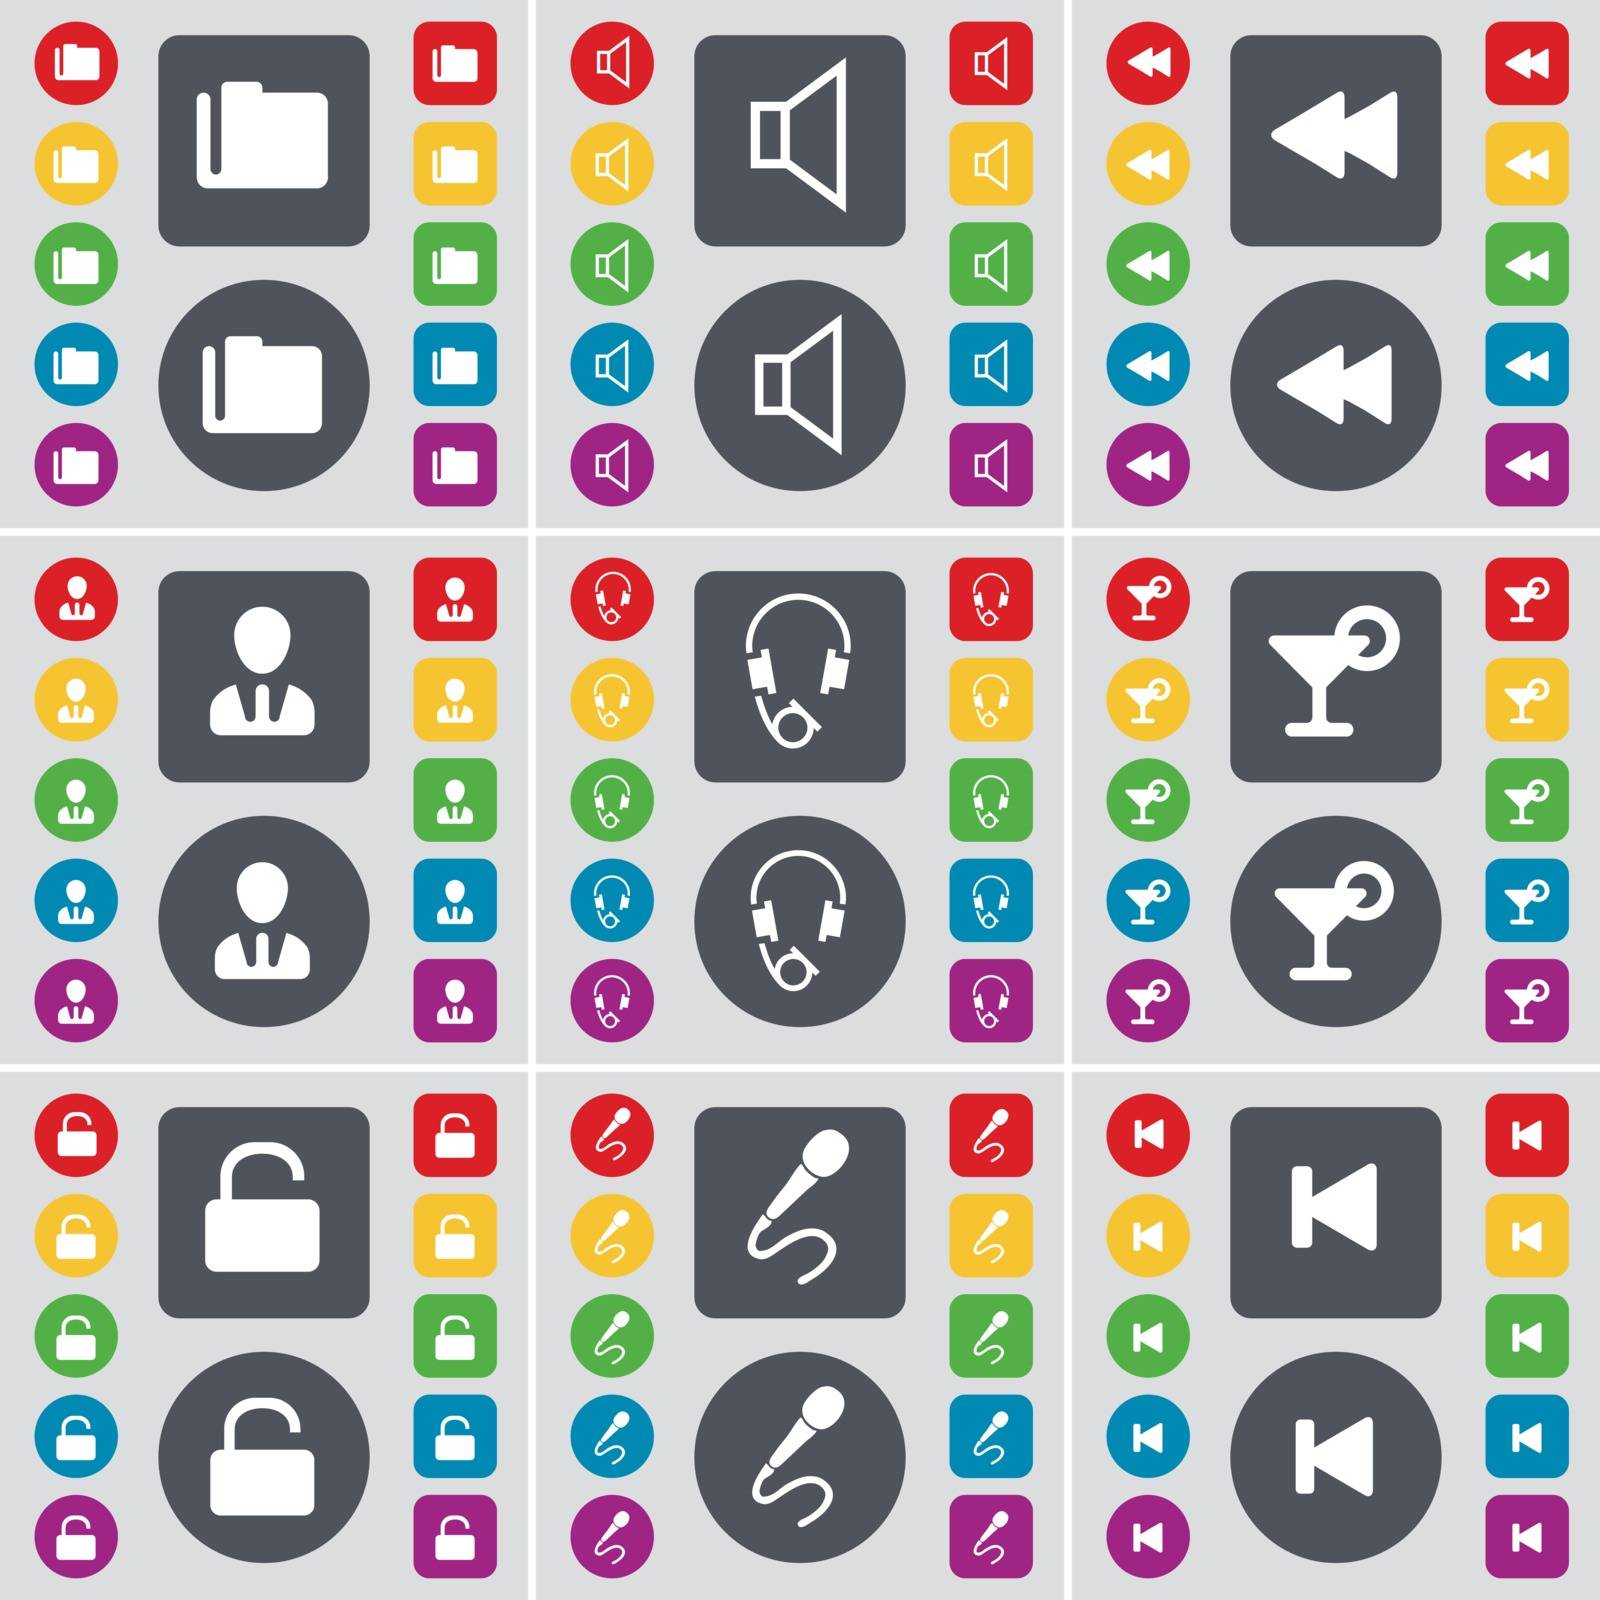 Folder, Sound, Rewind, Avatar, Headphones, Cocktail, Lock, Microphone, Media skip icon symbol. A large set of flat, colored buttons for your design. Vector by serhii_lohvyniuk